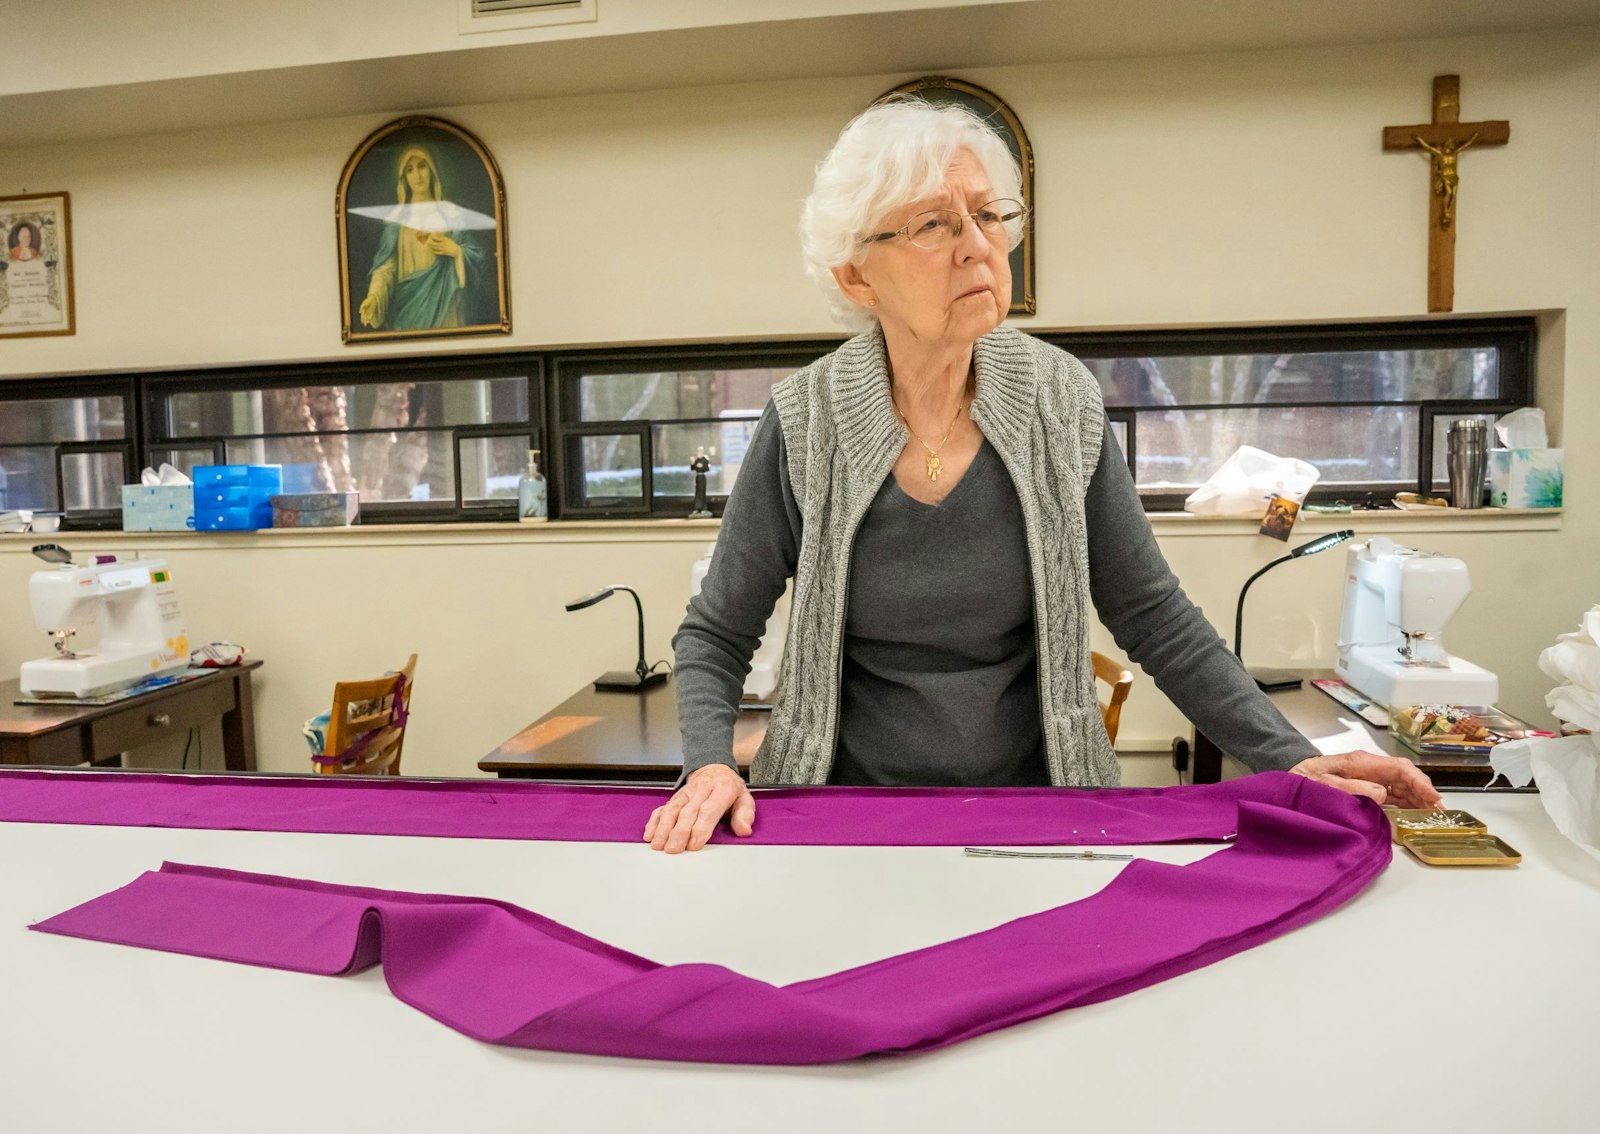 Sewer Dorothy Merlo prepares a vestment in the Eucharistic Mission Band's meeting room at St. Bonaventure Monastery on Detroit's lower-east side. For a $150 donation, the group can complete a chasuble and a stole for priests in the Capuchin mission fields overseas.